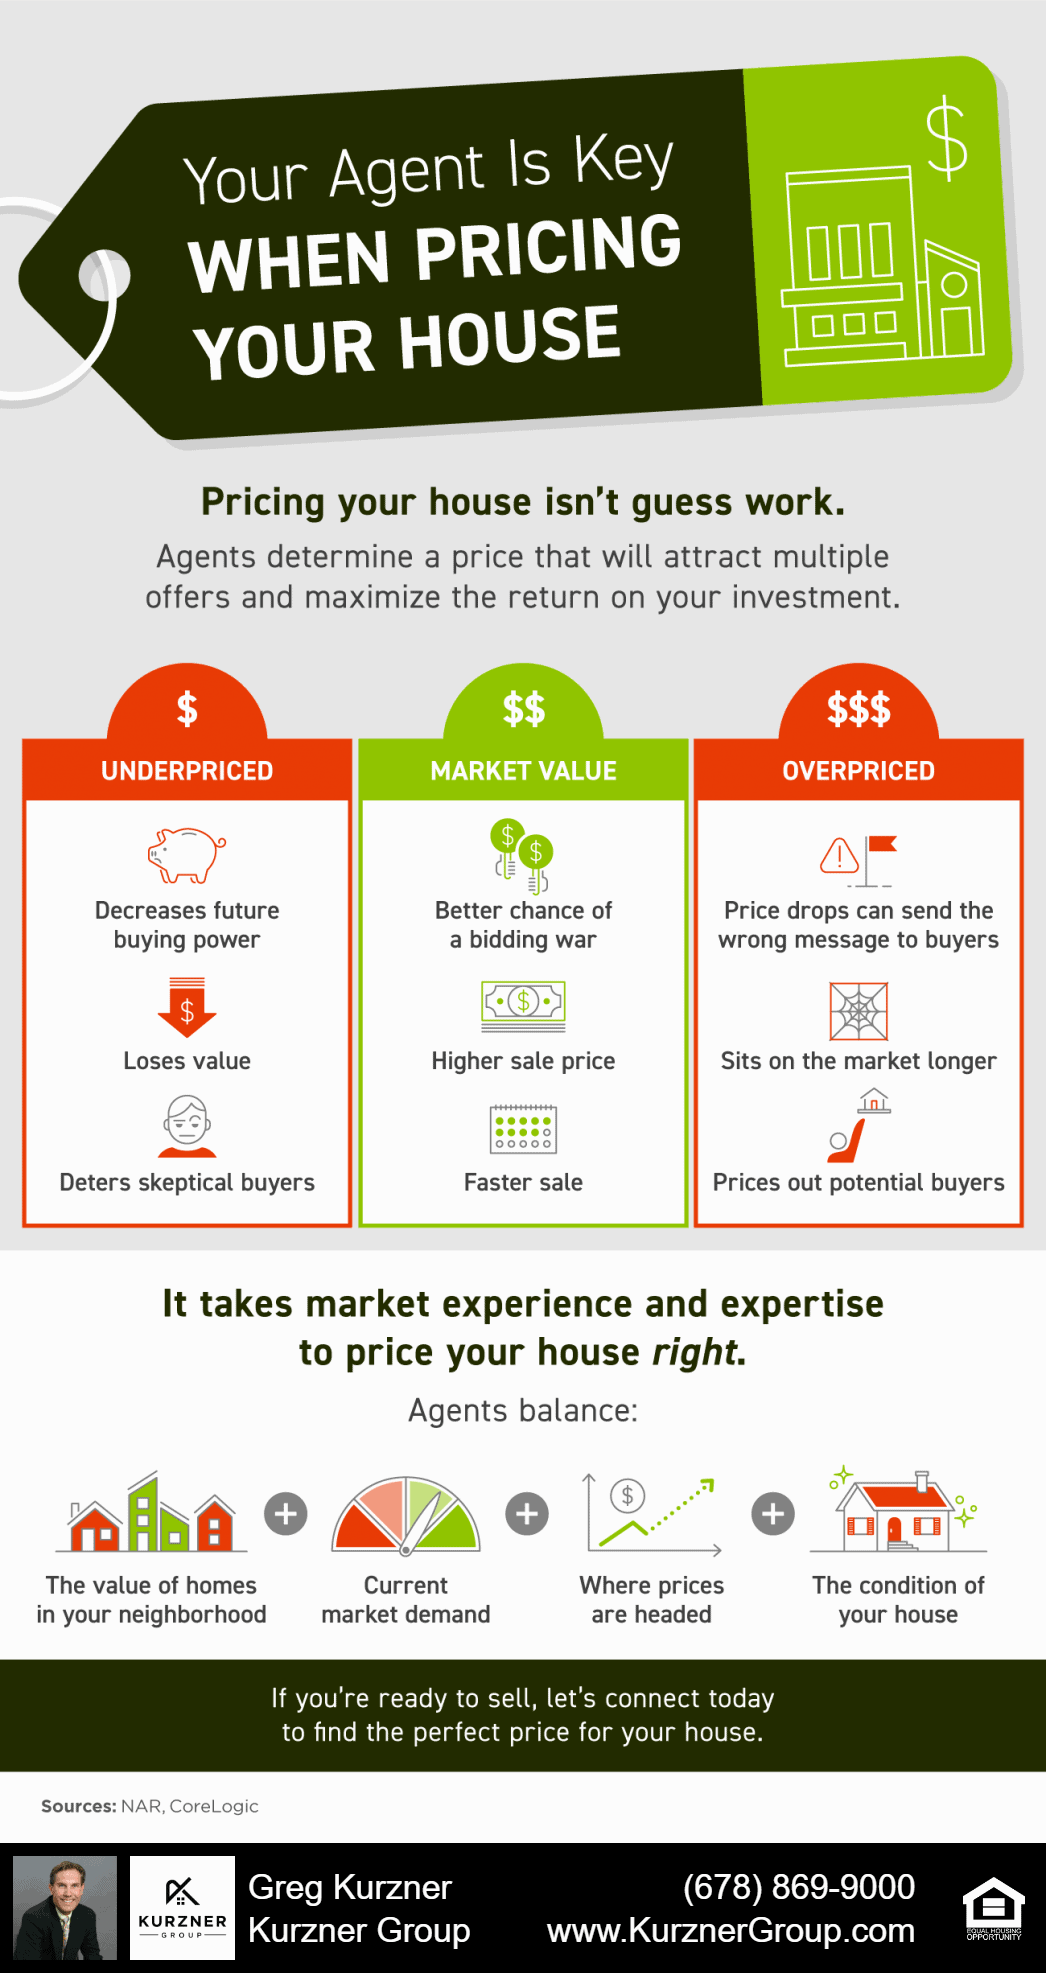 Your Agent Is Key When Pricing Your House [INFOGRAPHIC]